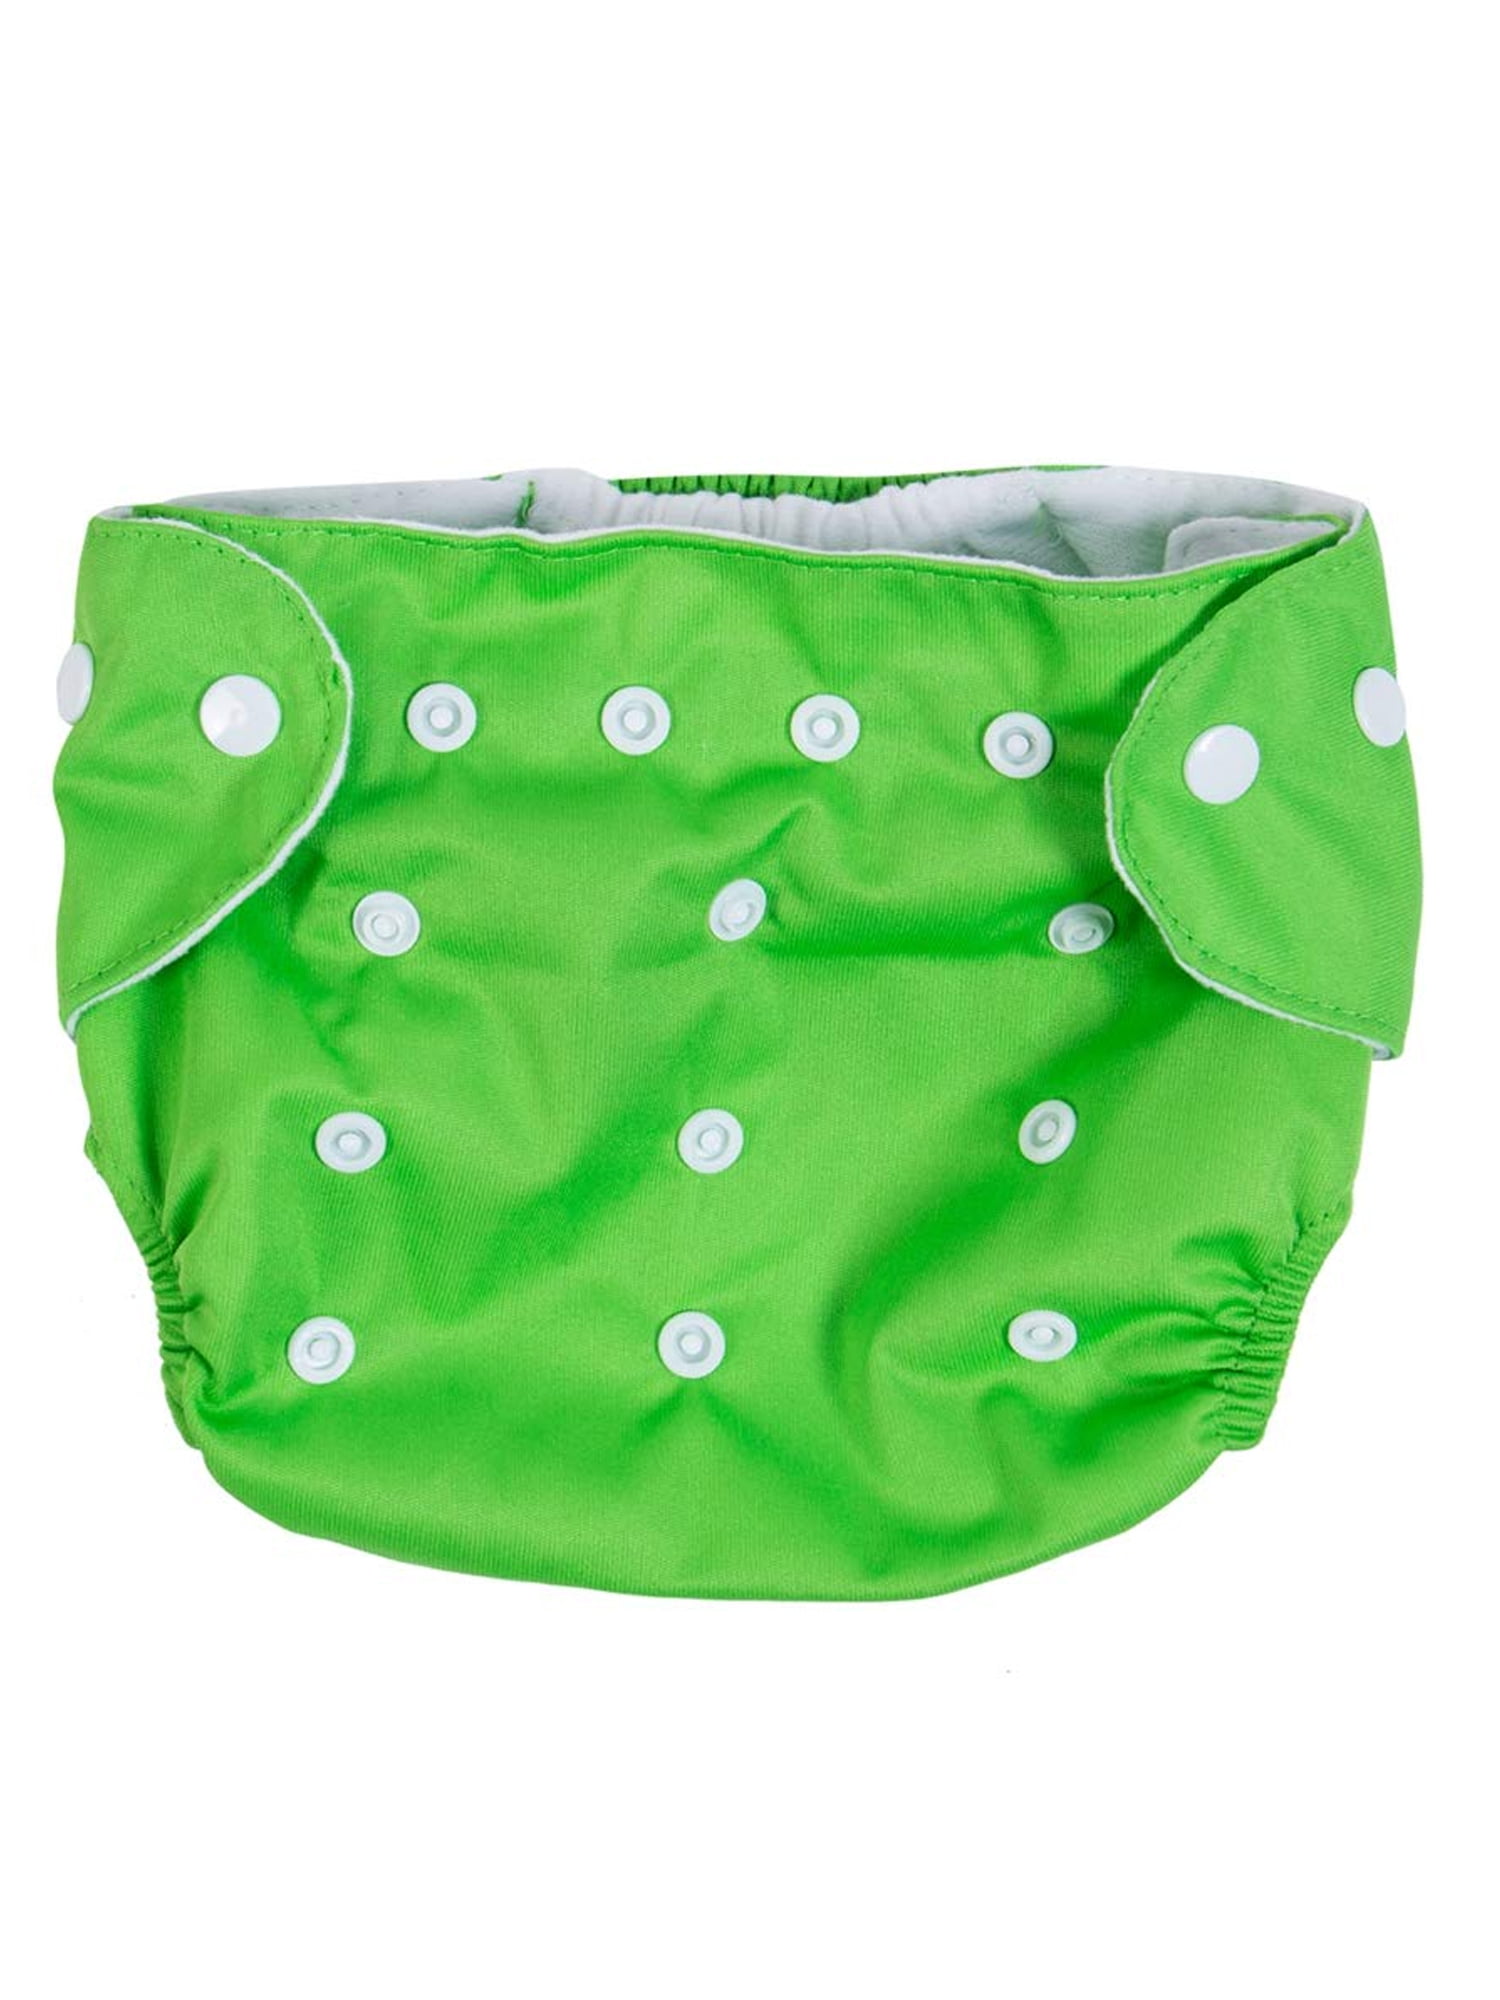 Newborn Baby Infant Summer Cloth Diaper Cover Adjustable Reusable Washable Nappy 